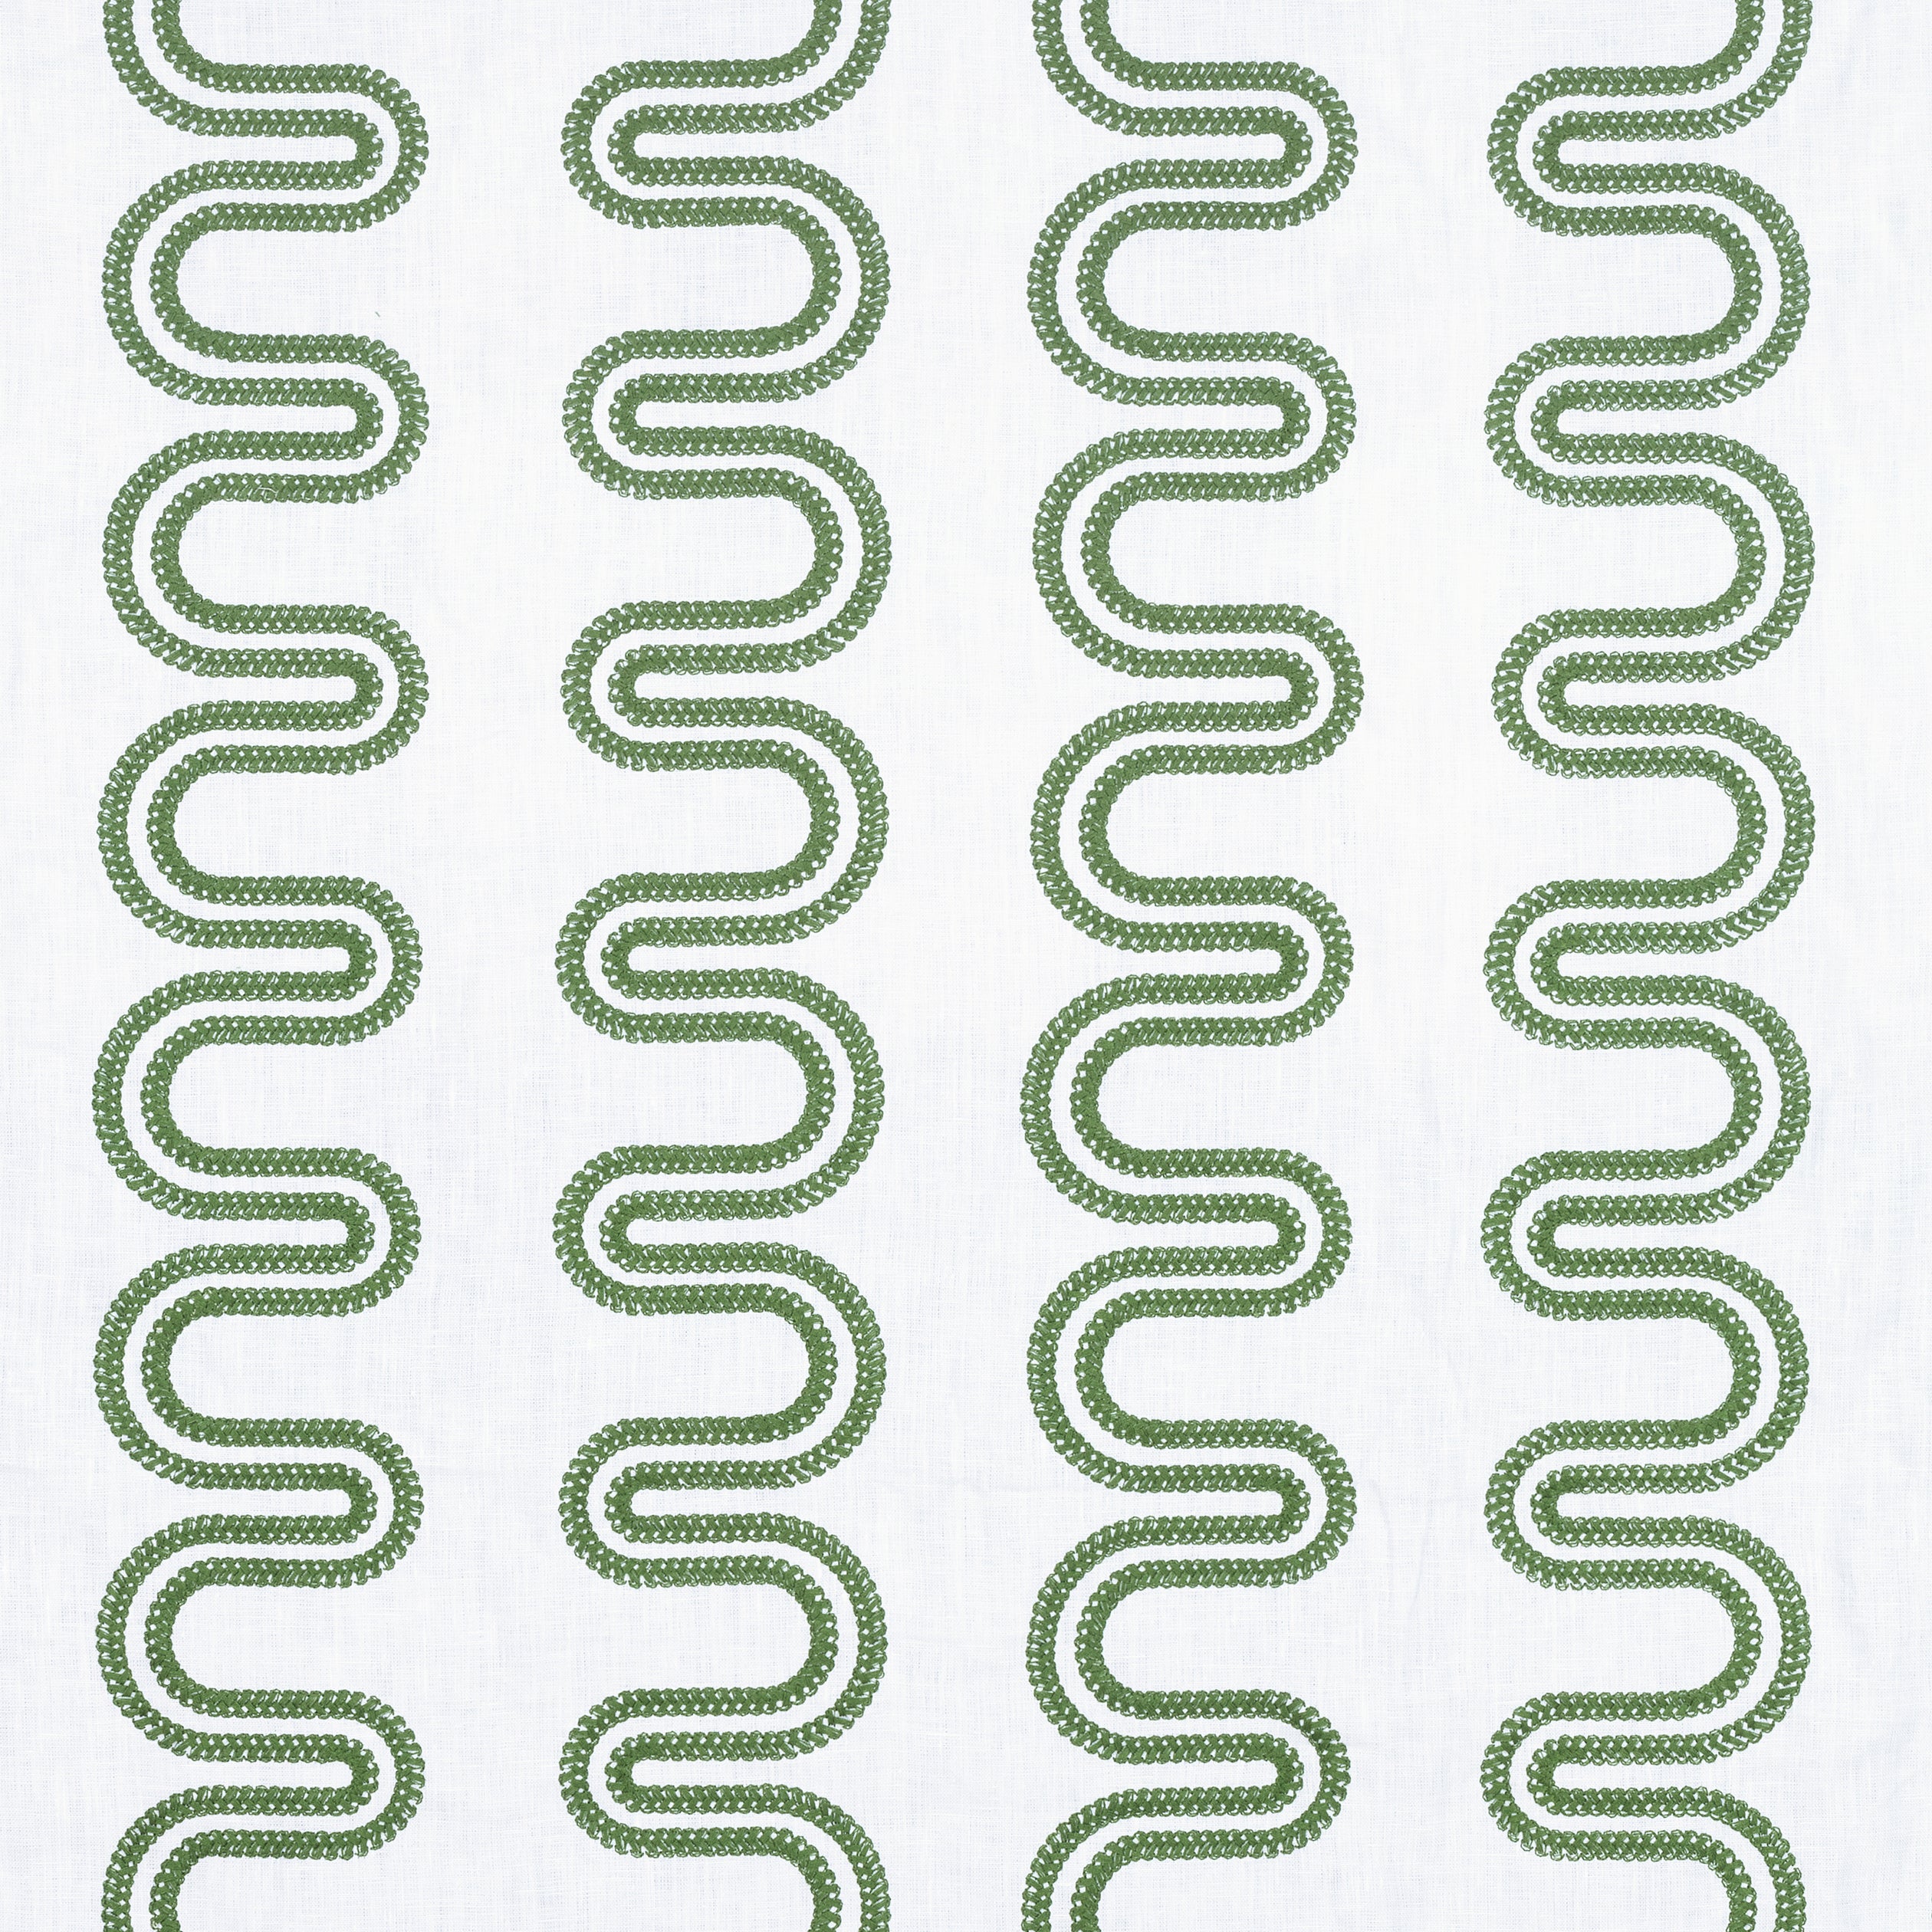 Herriot Way Embroidery fabric in green on white  color - pattern number AF9635 - by Anna French in the Savoy collection